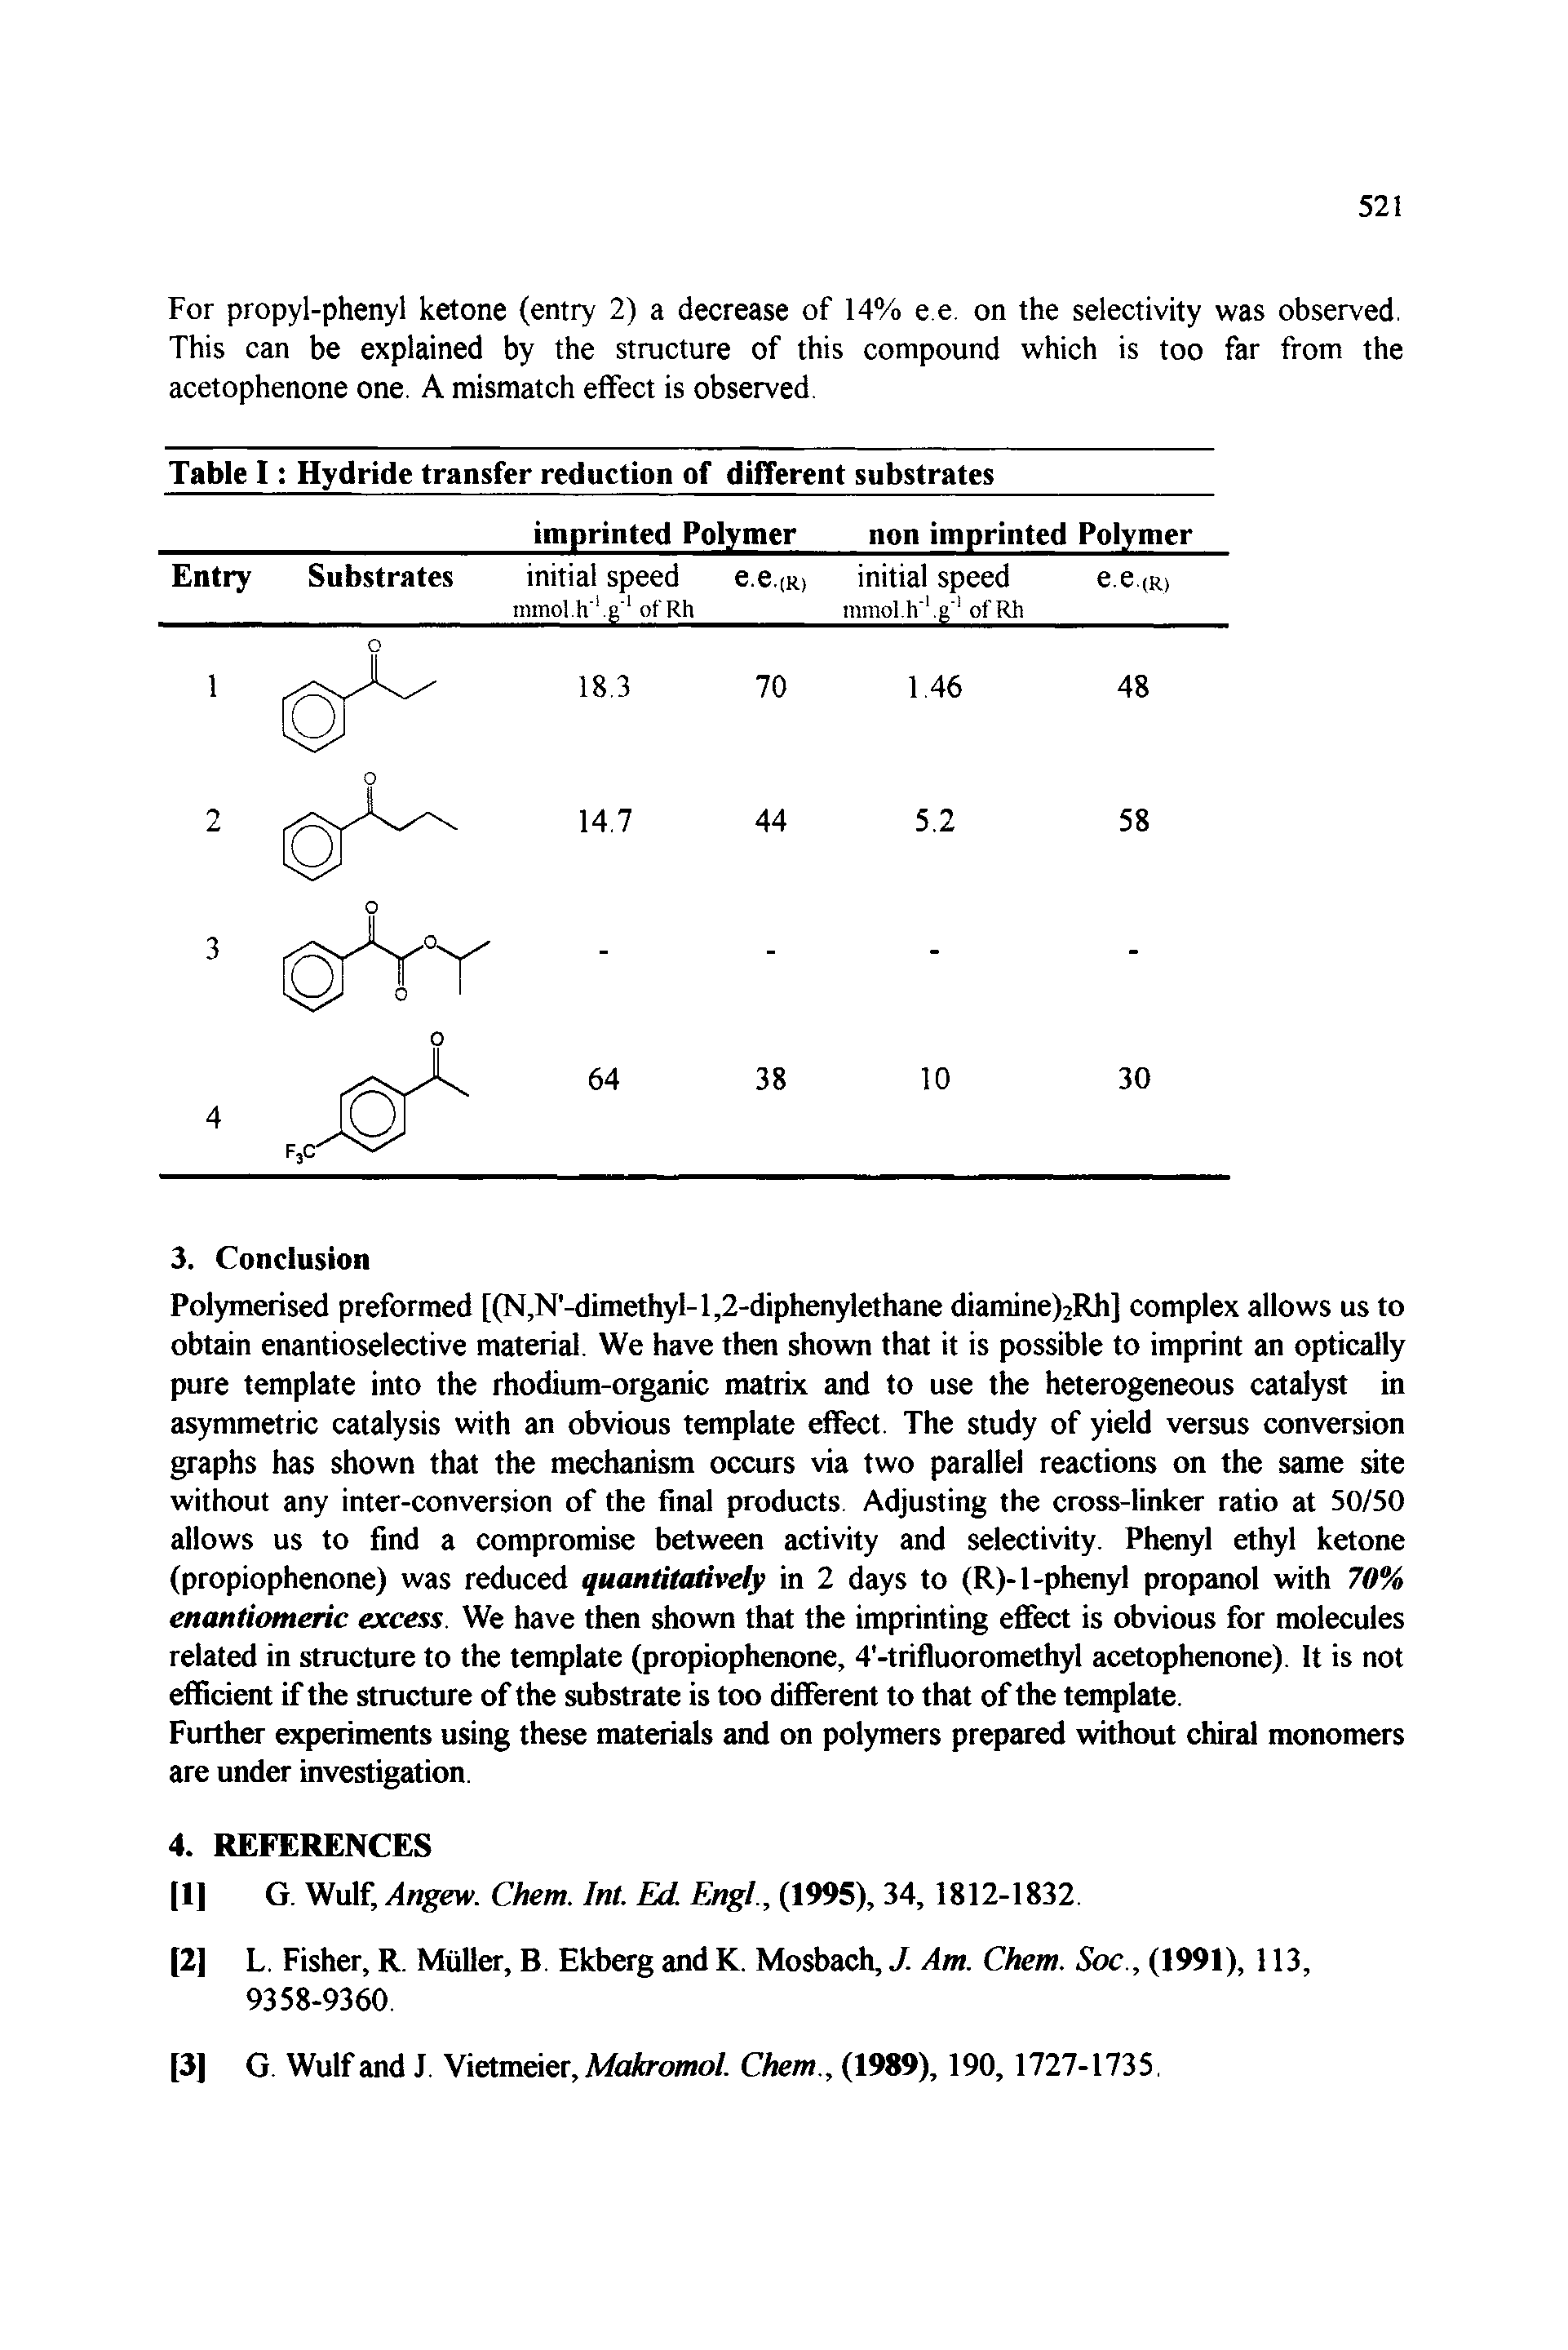 Table I Hydride transfer reduction of different substrates ...